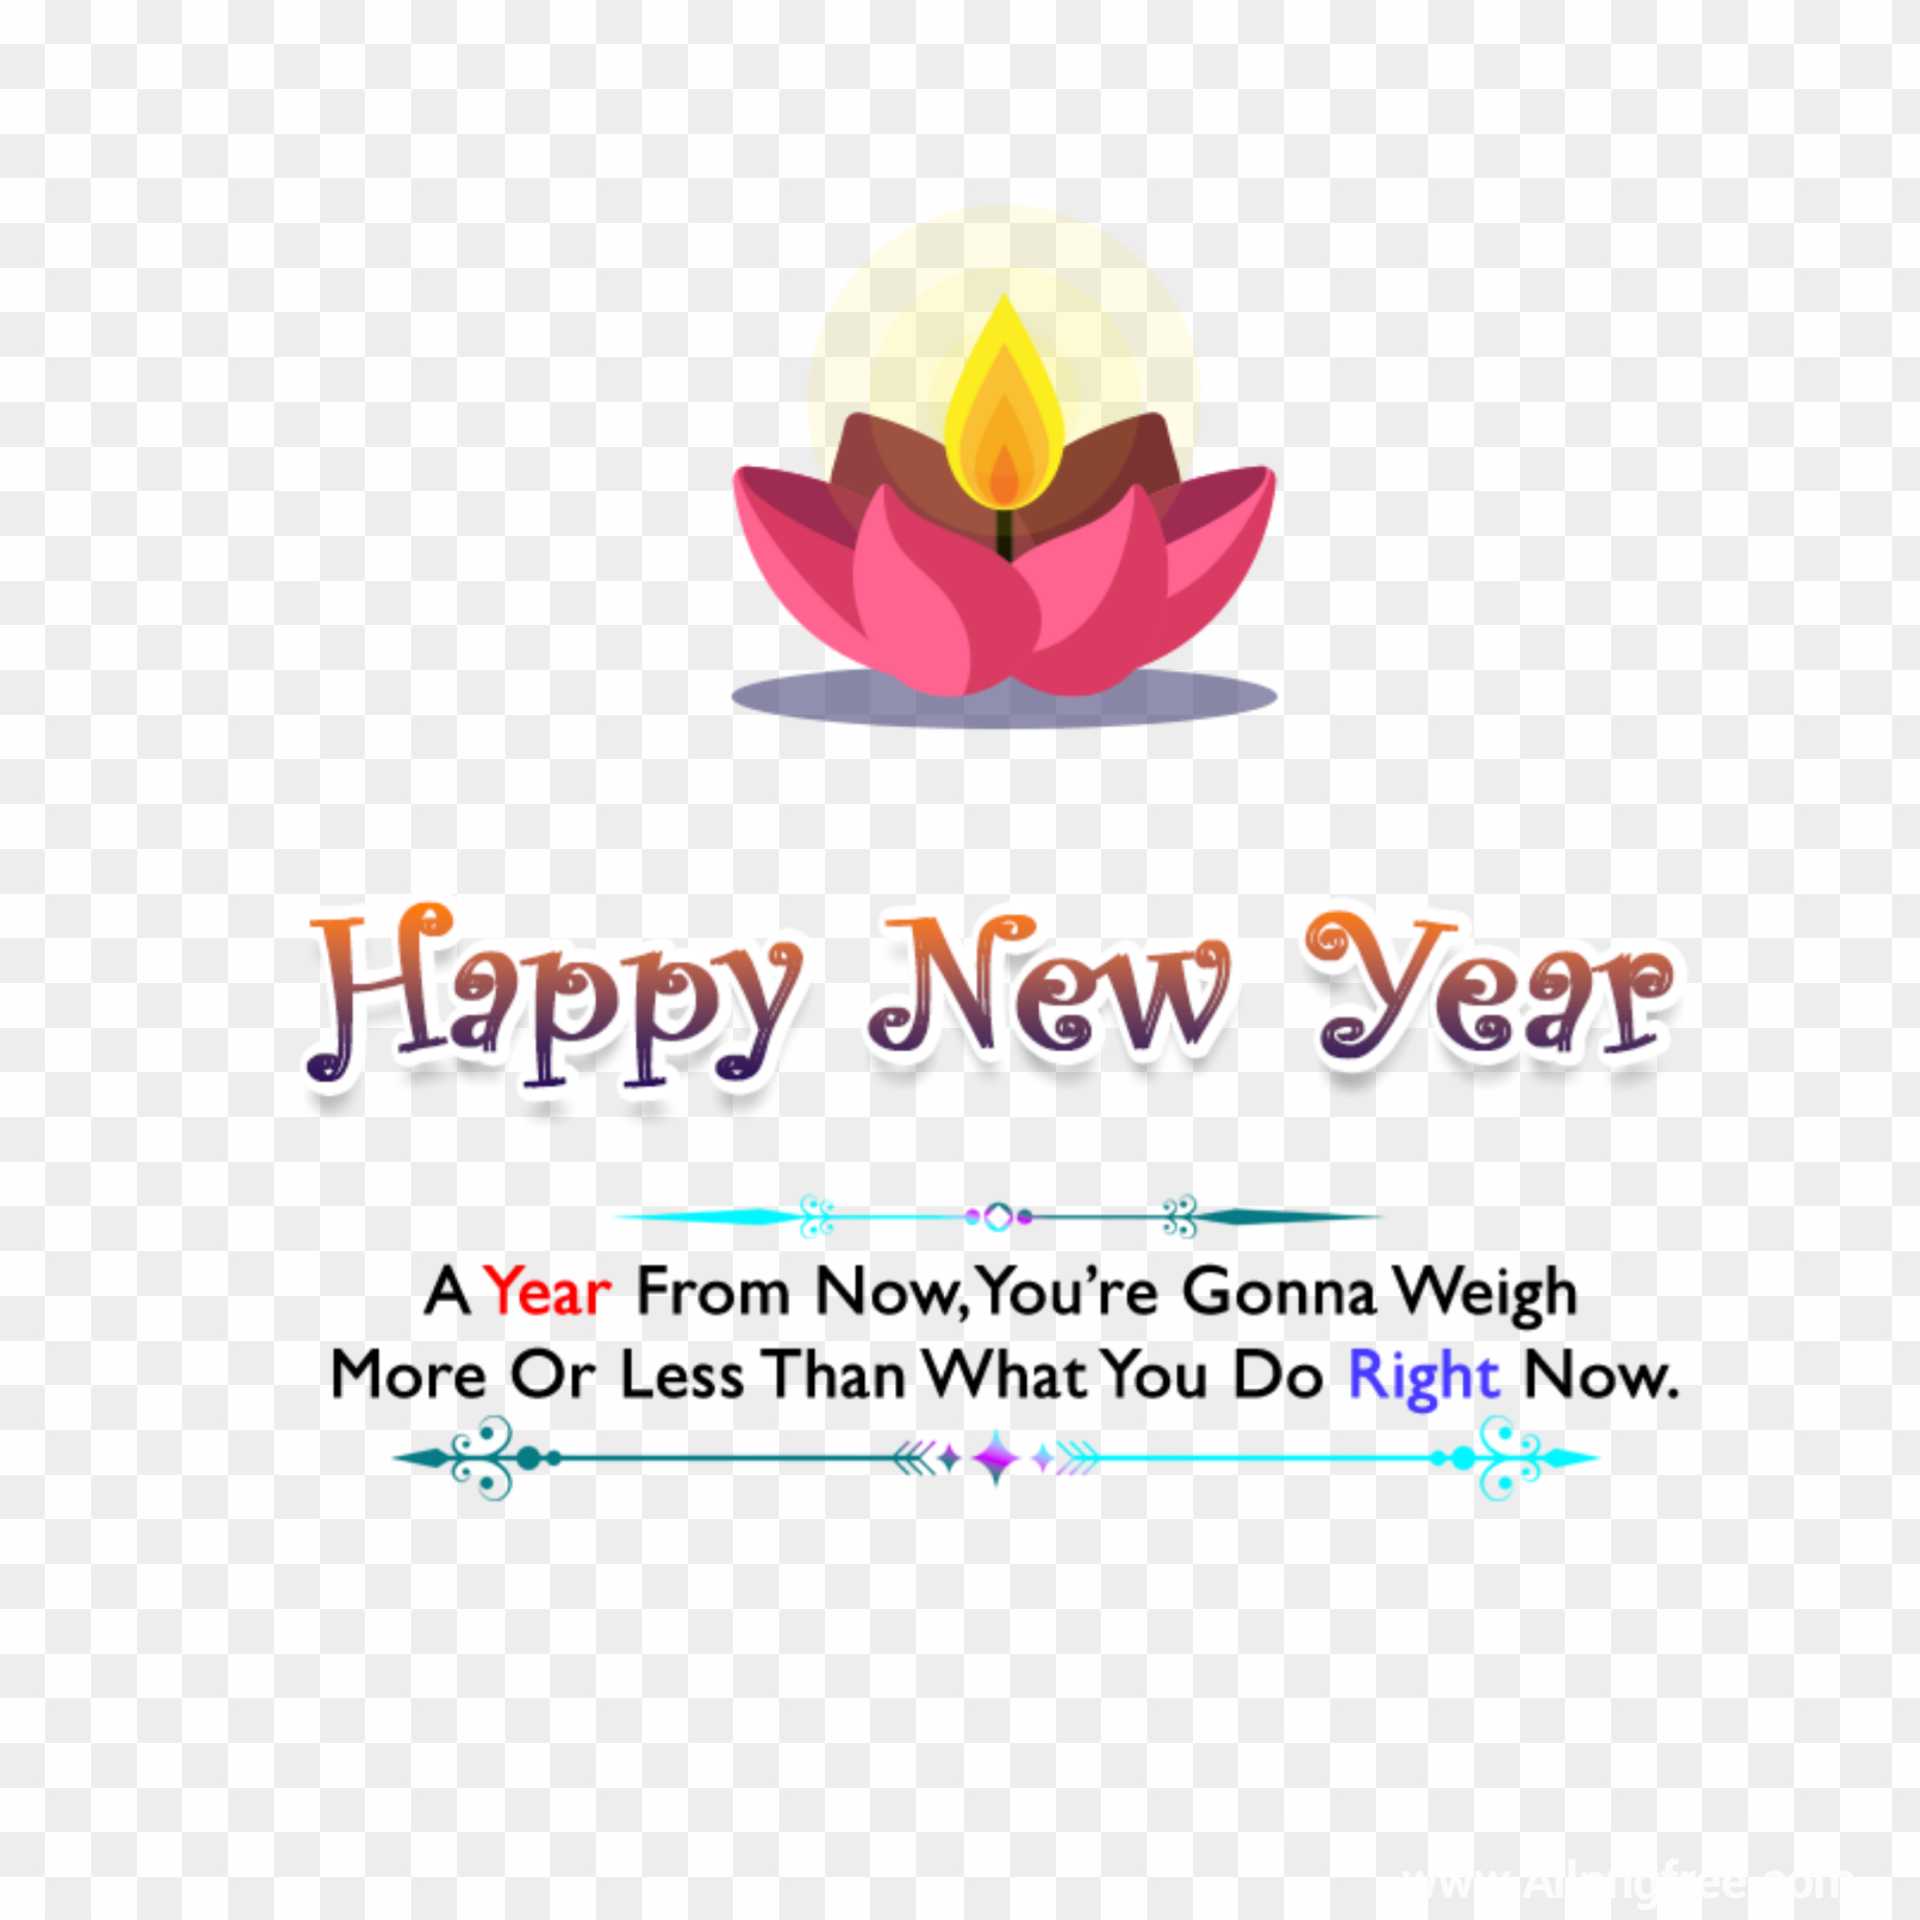 Happy New year PNG transparent images download